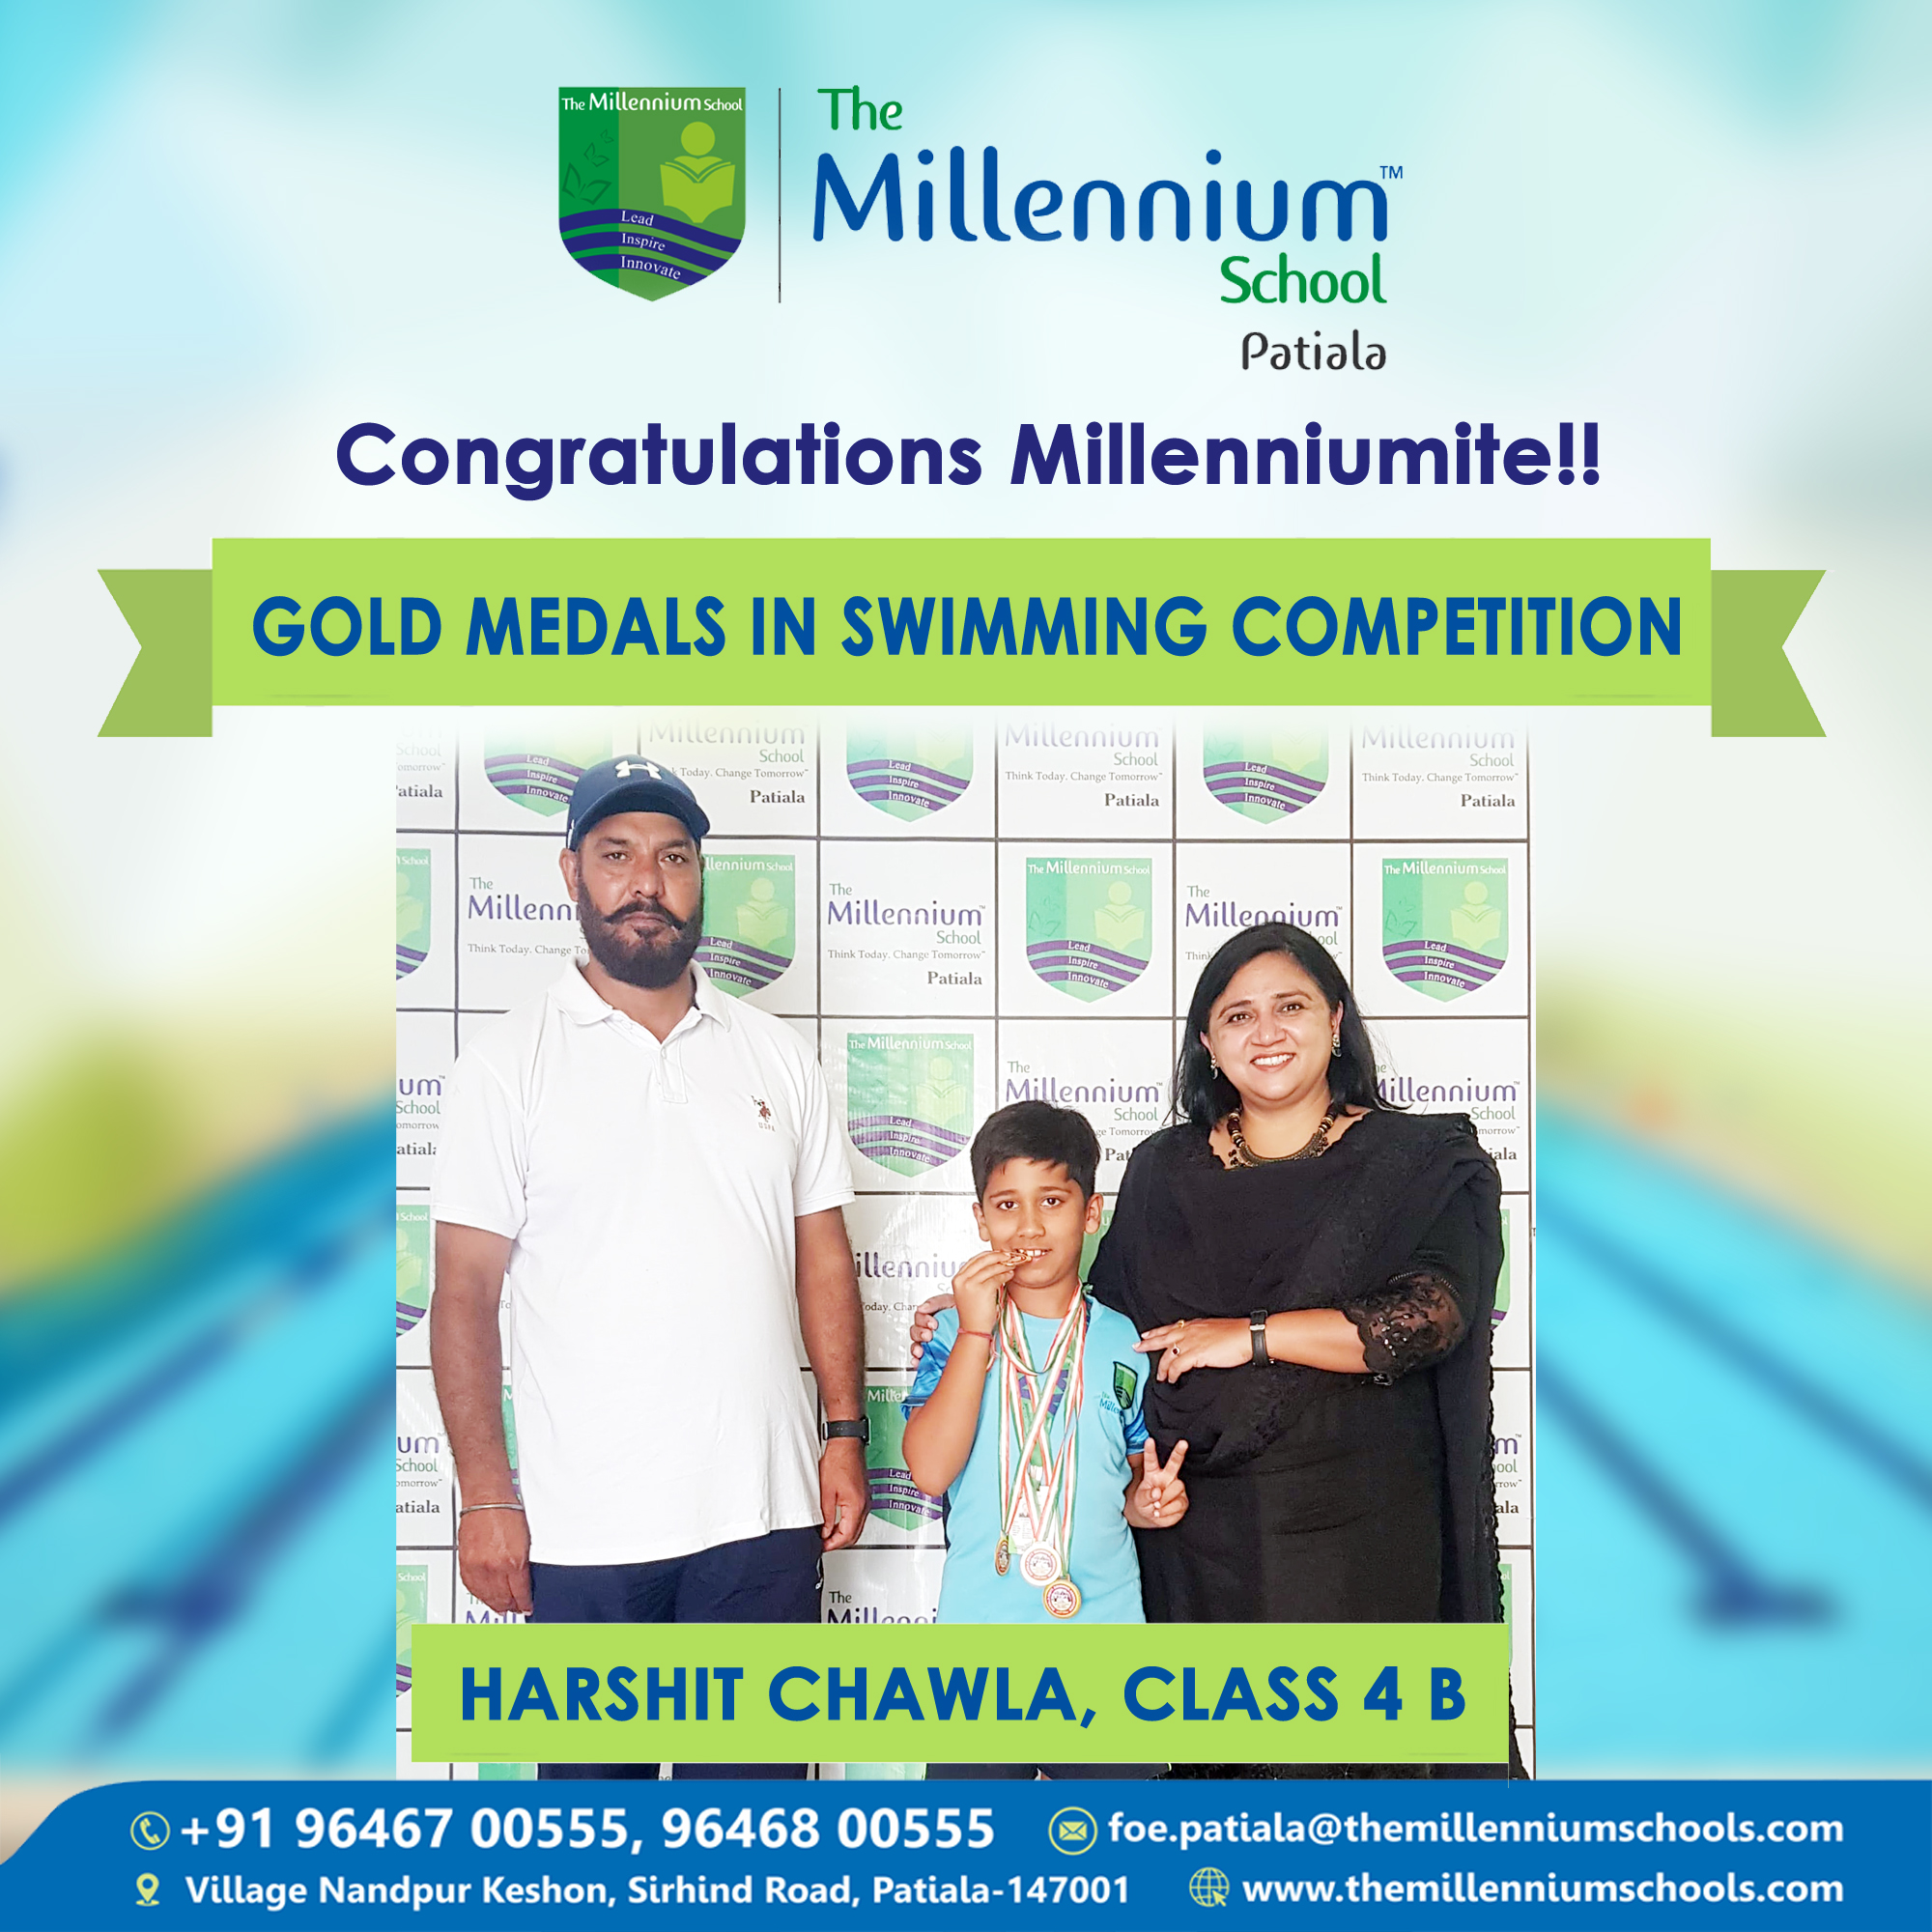 Harshit Chawla emerged as a standout swimmer, clinching four Gold Medals